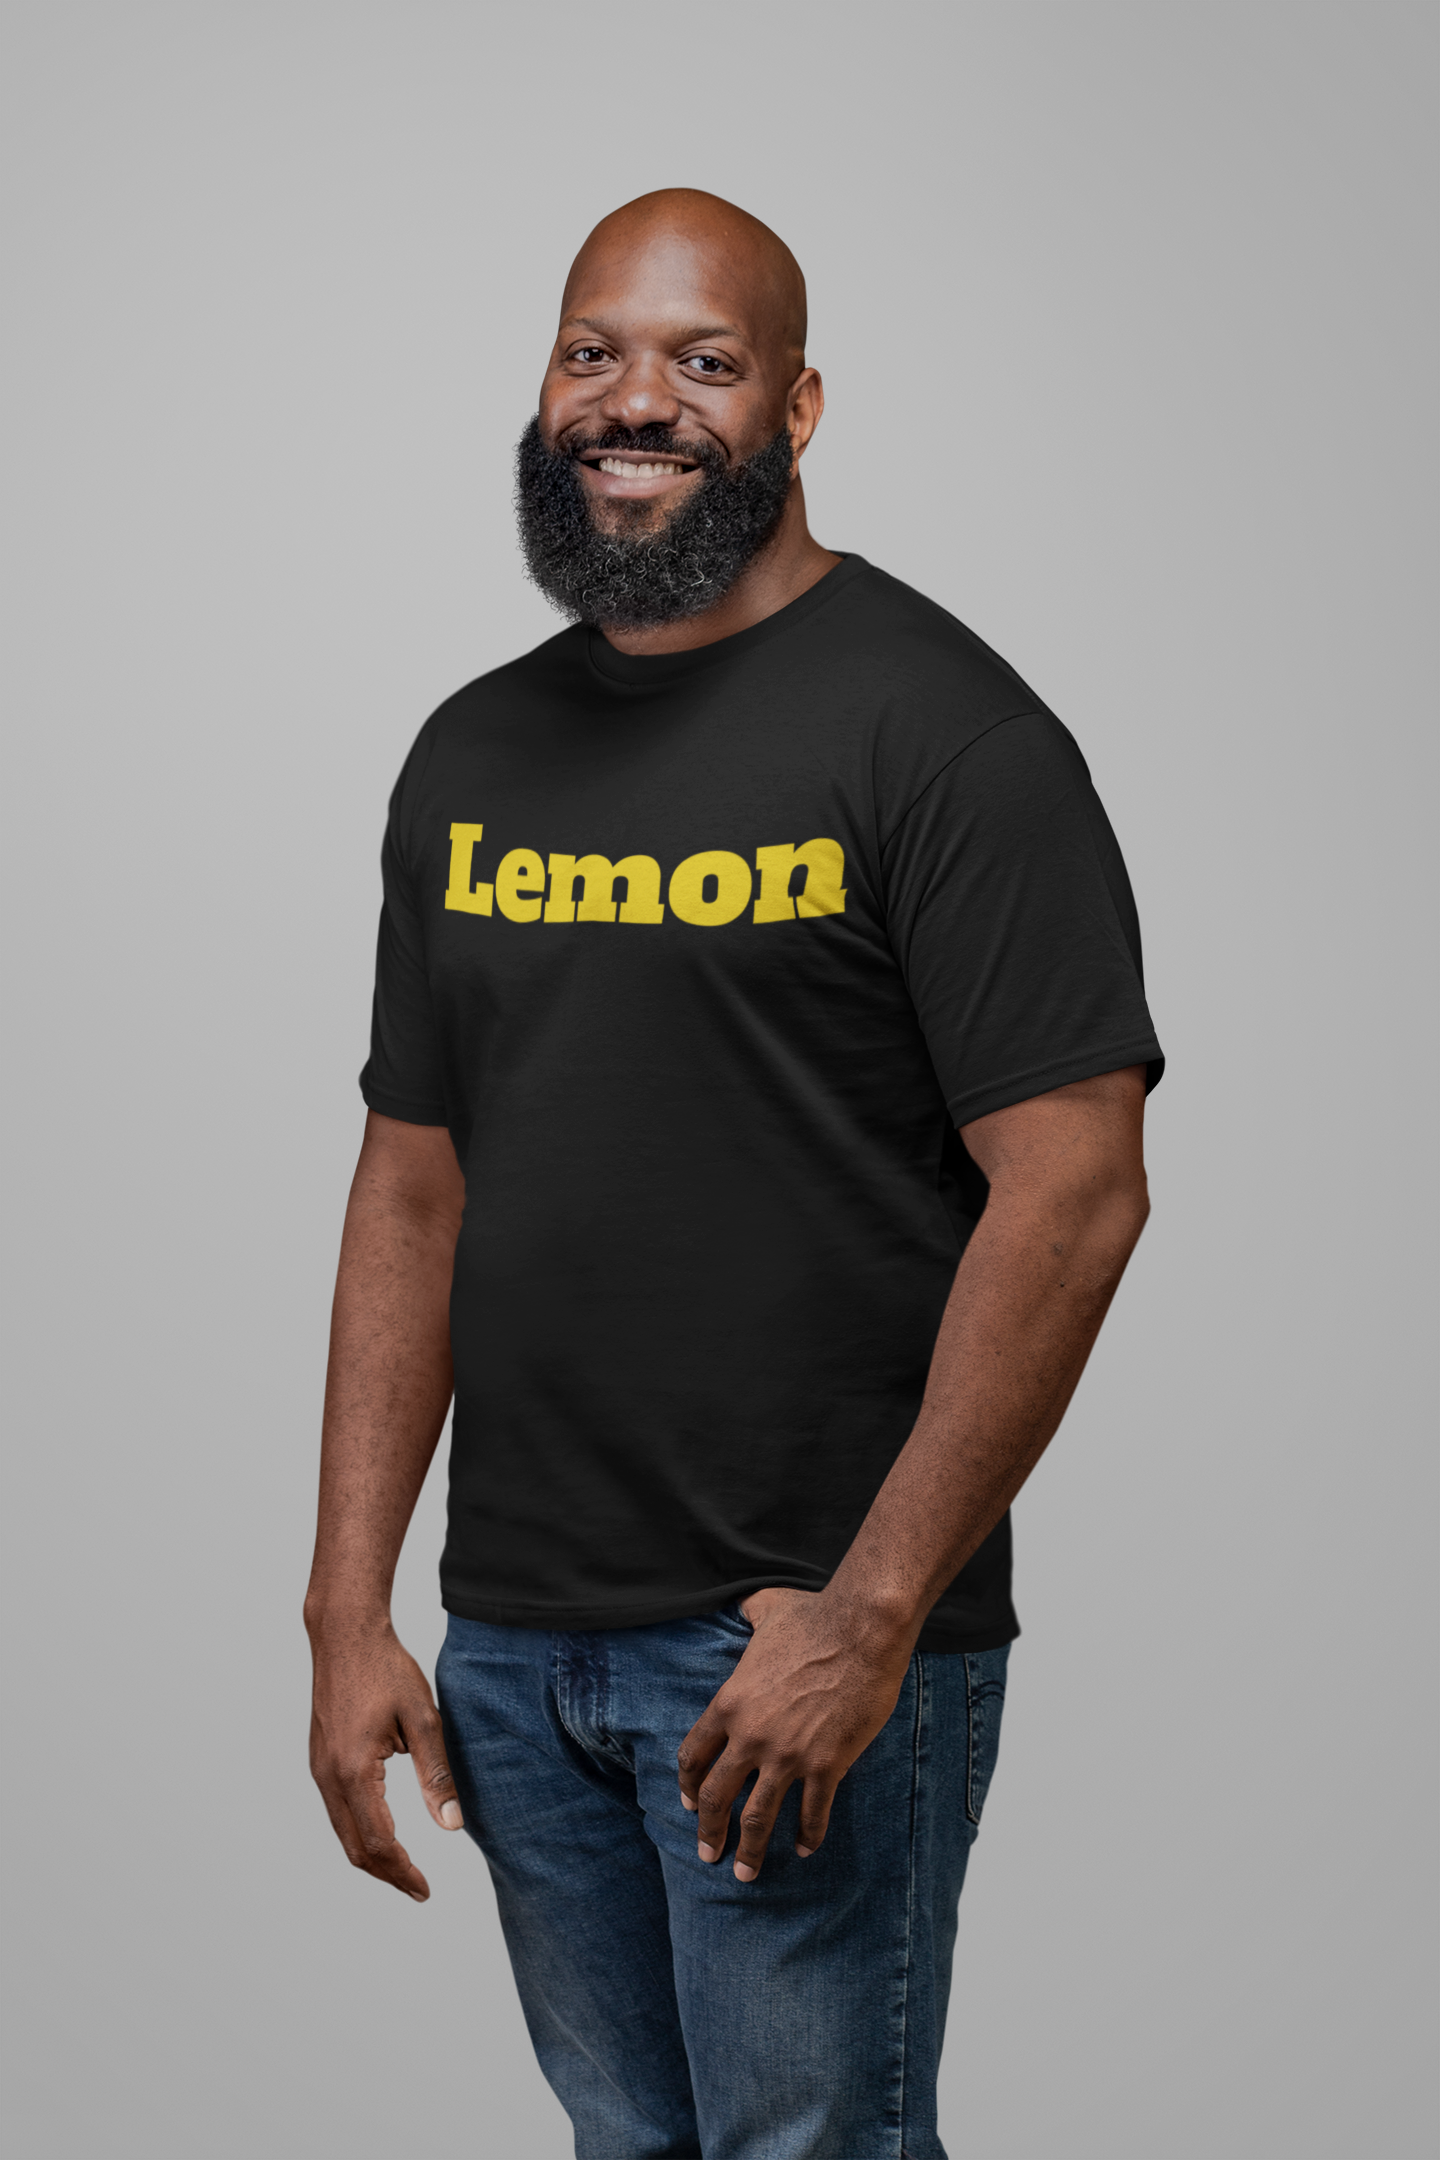 t-shirt-mockup-of-a-smiling-man-with-a-thick-beard-21522.png